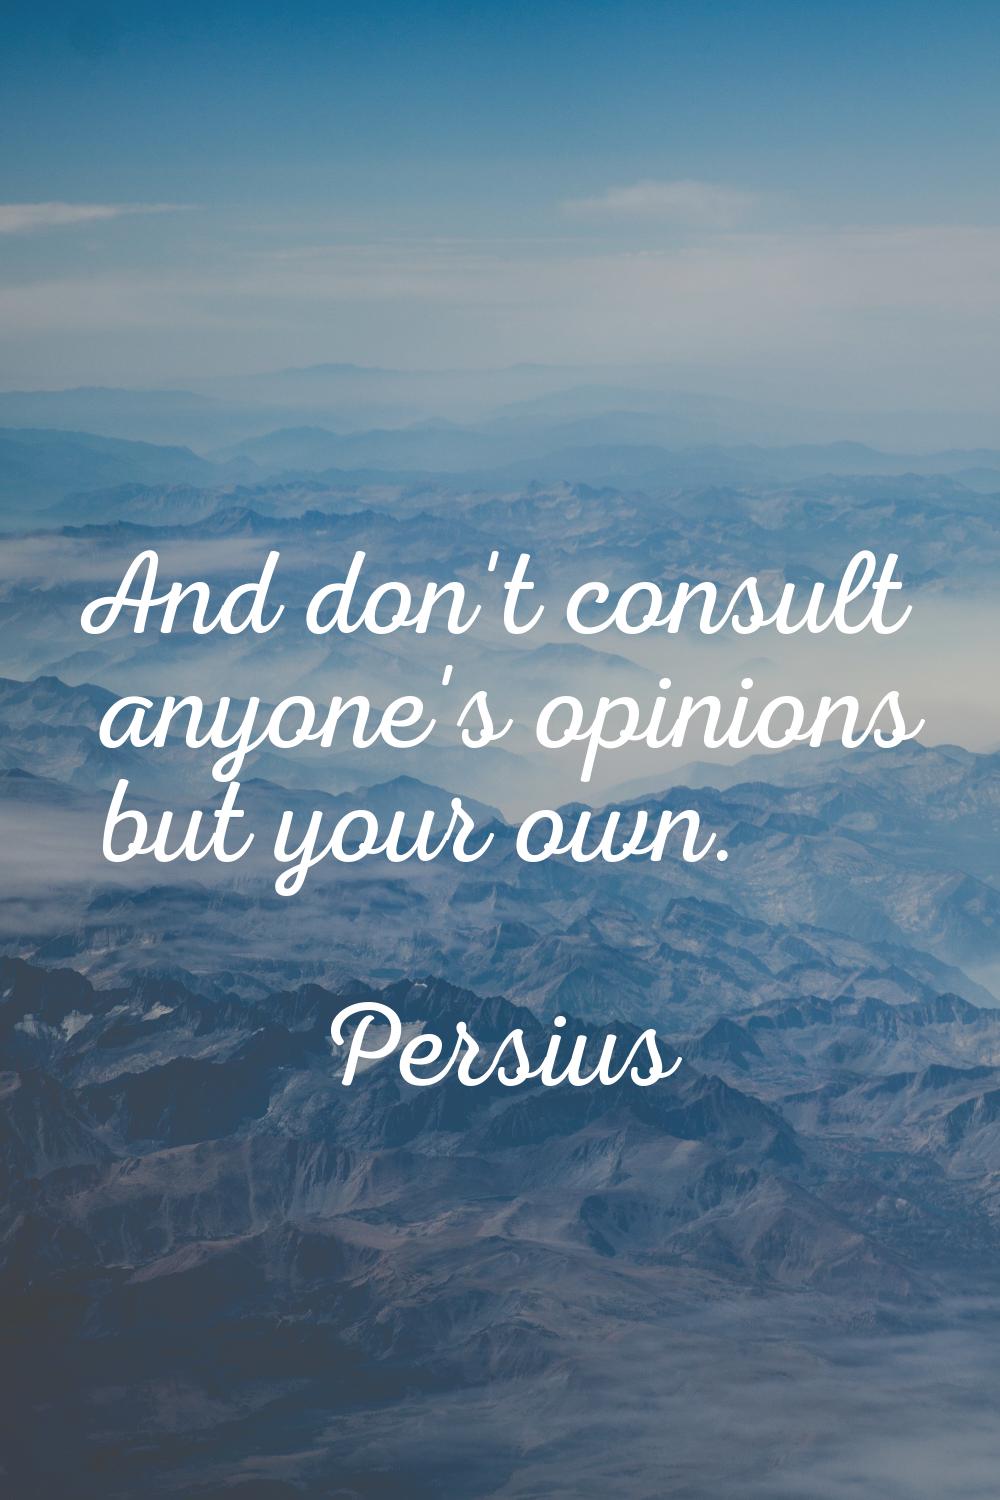 And don't consult anyone's opinions but your own.